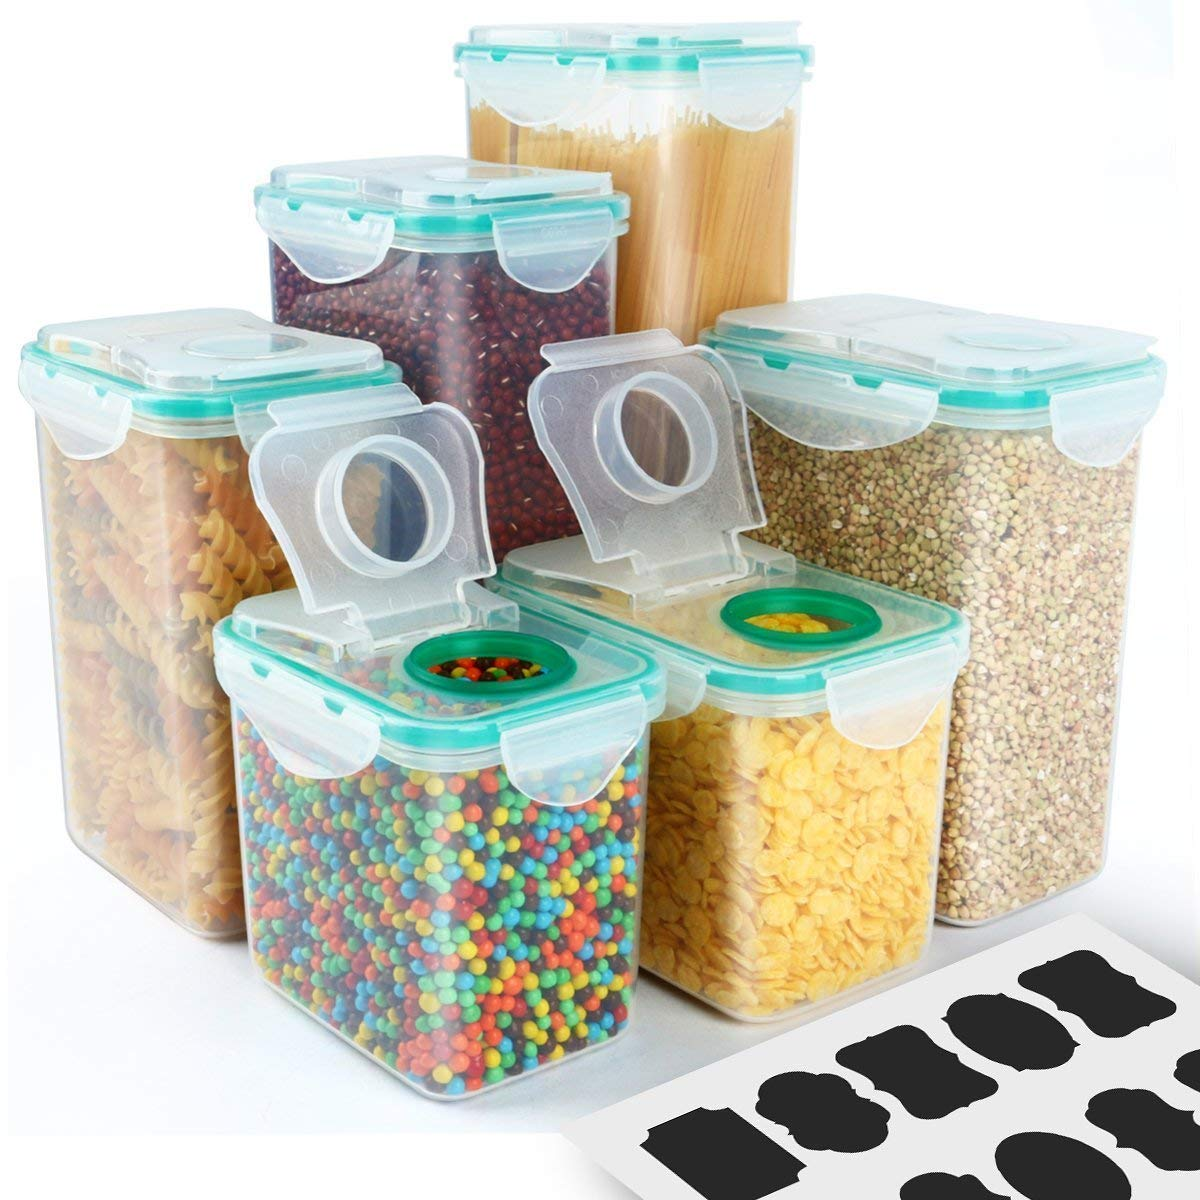 Amazon: Plastic Storage Containers 6 Pack Only $17.00!